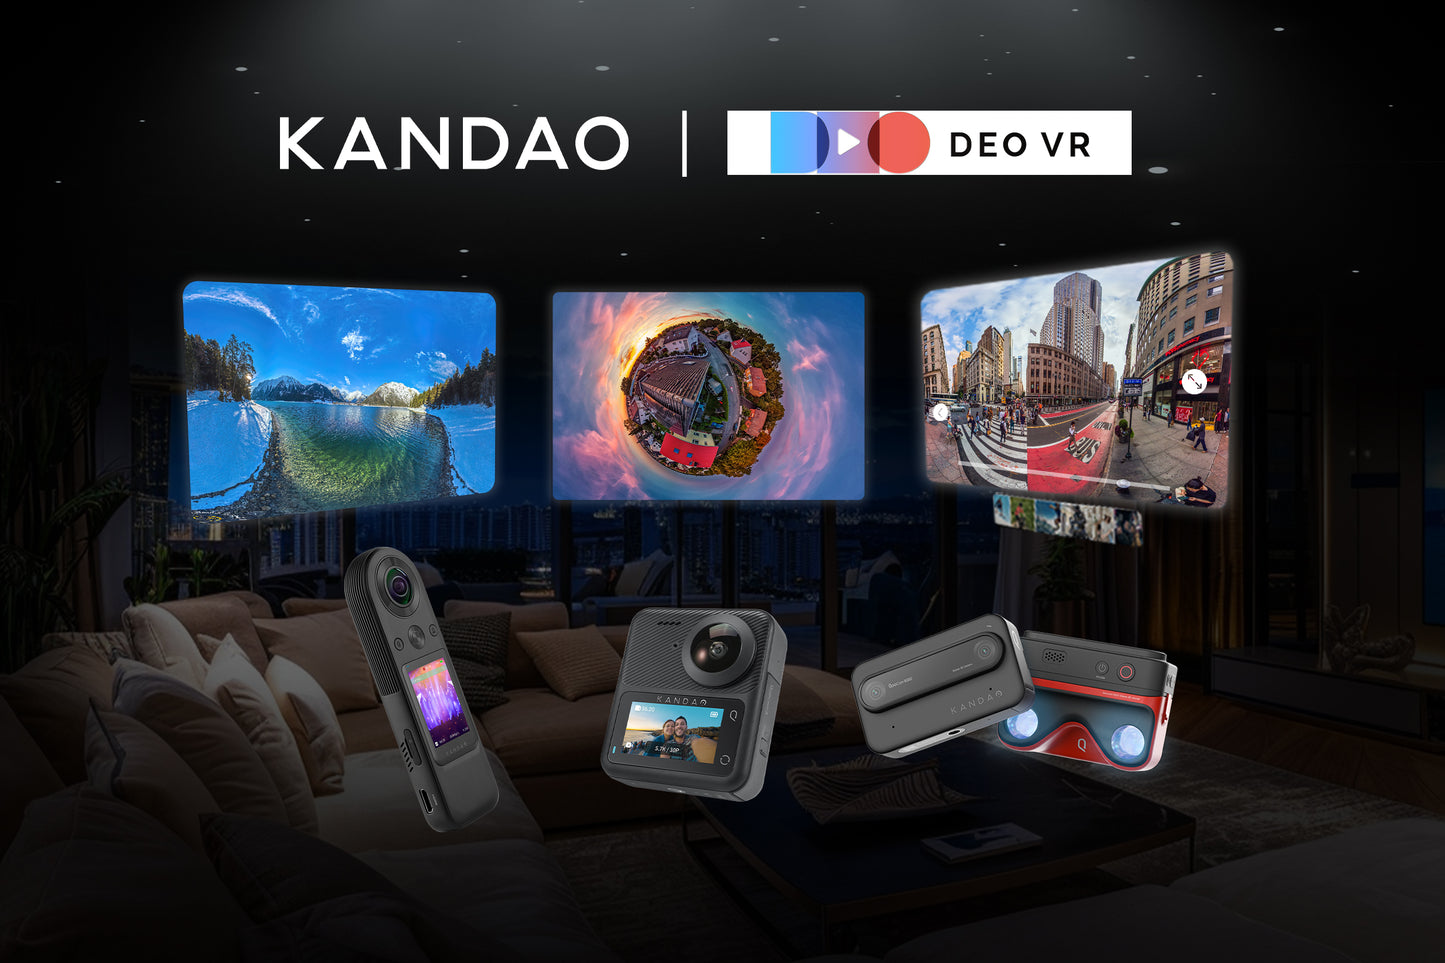 Breaking News: Kandao VR 360 & DEOVR Join Forces for Immersive Content Experience!